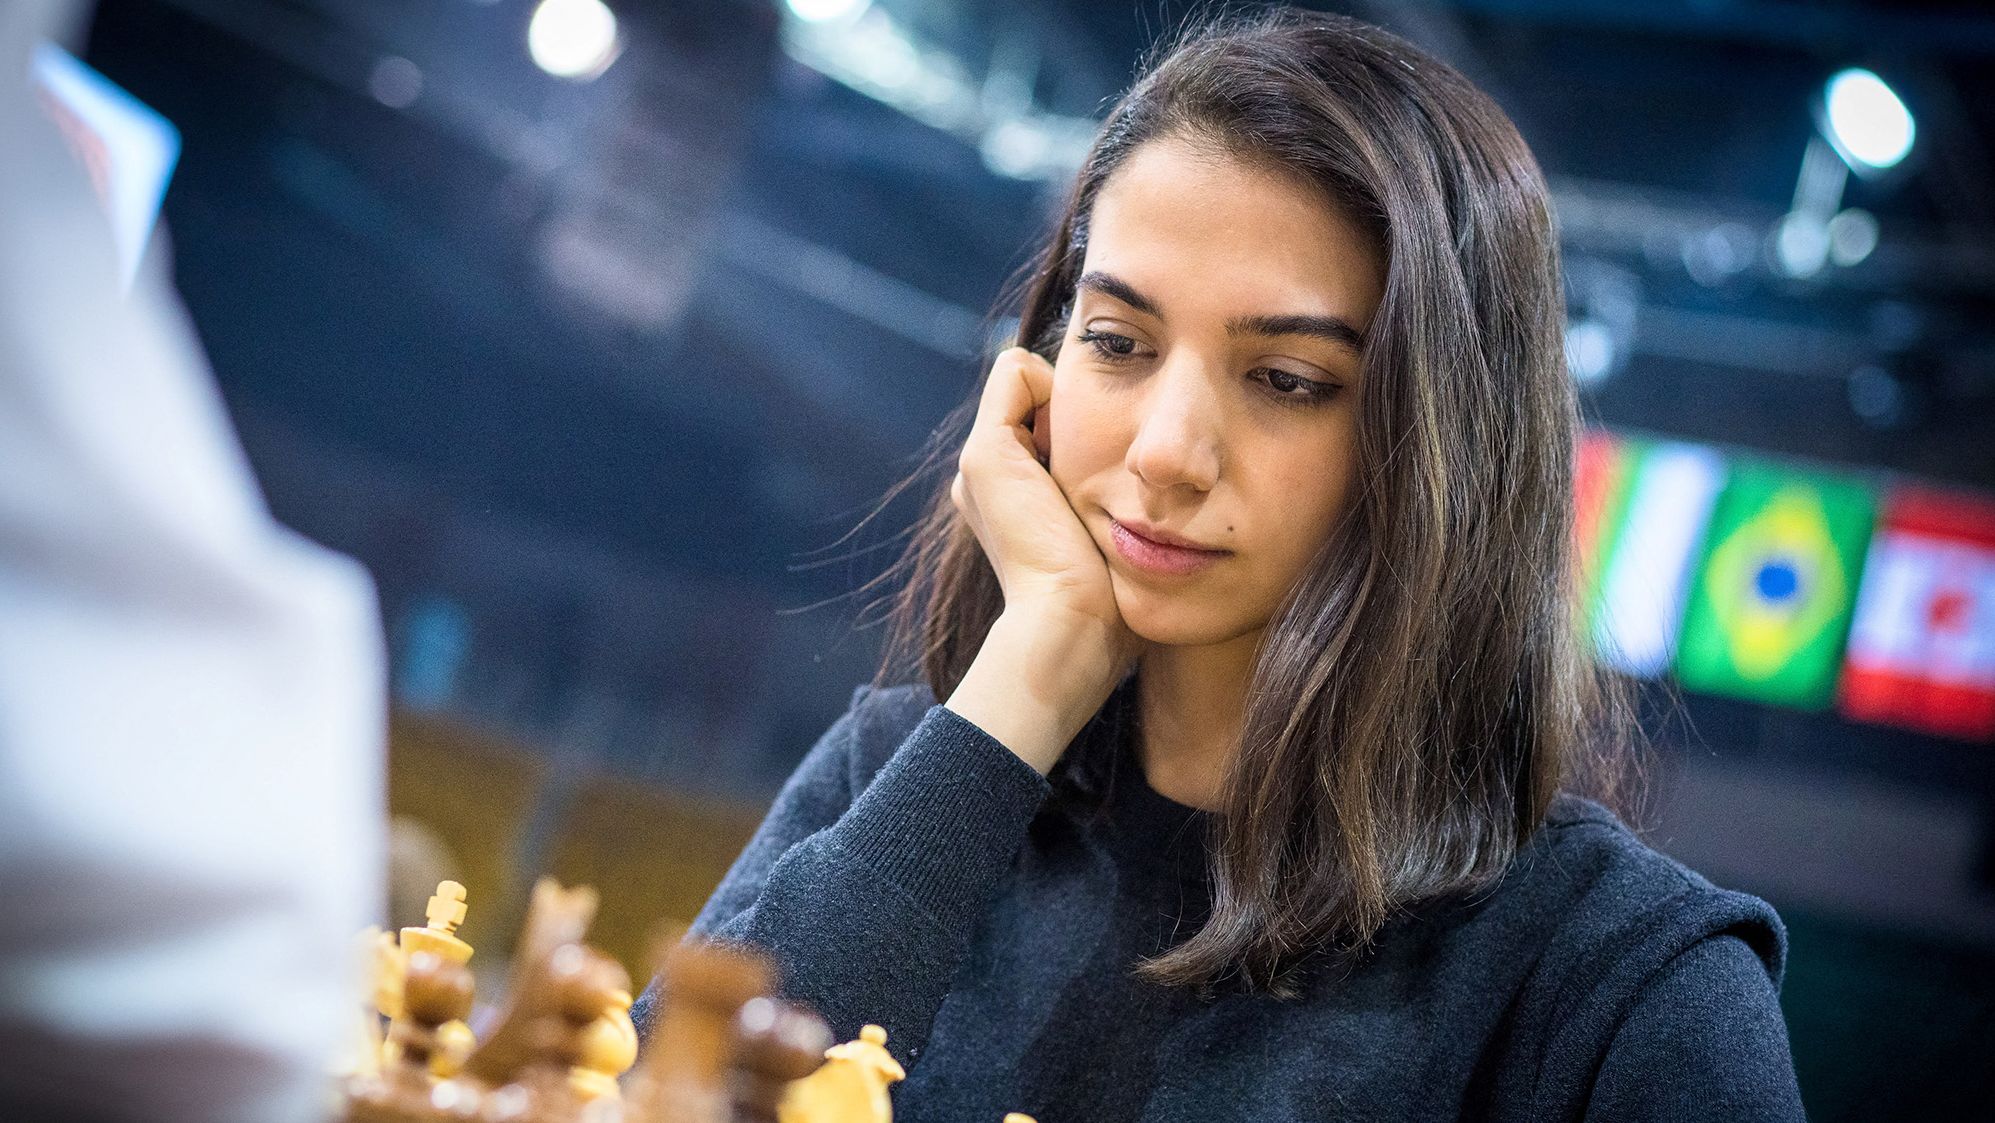 Iranian chess player Sara Khadem competes, without wearing a hijab, in FIDE World Rapid and Blitz Chess Championships in Almaty, Kazakhstan on December 26, 2022. 